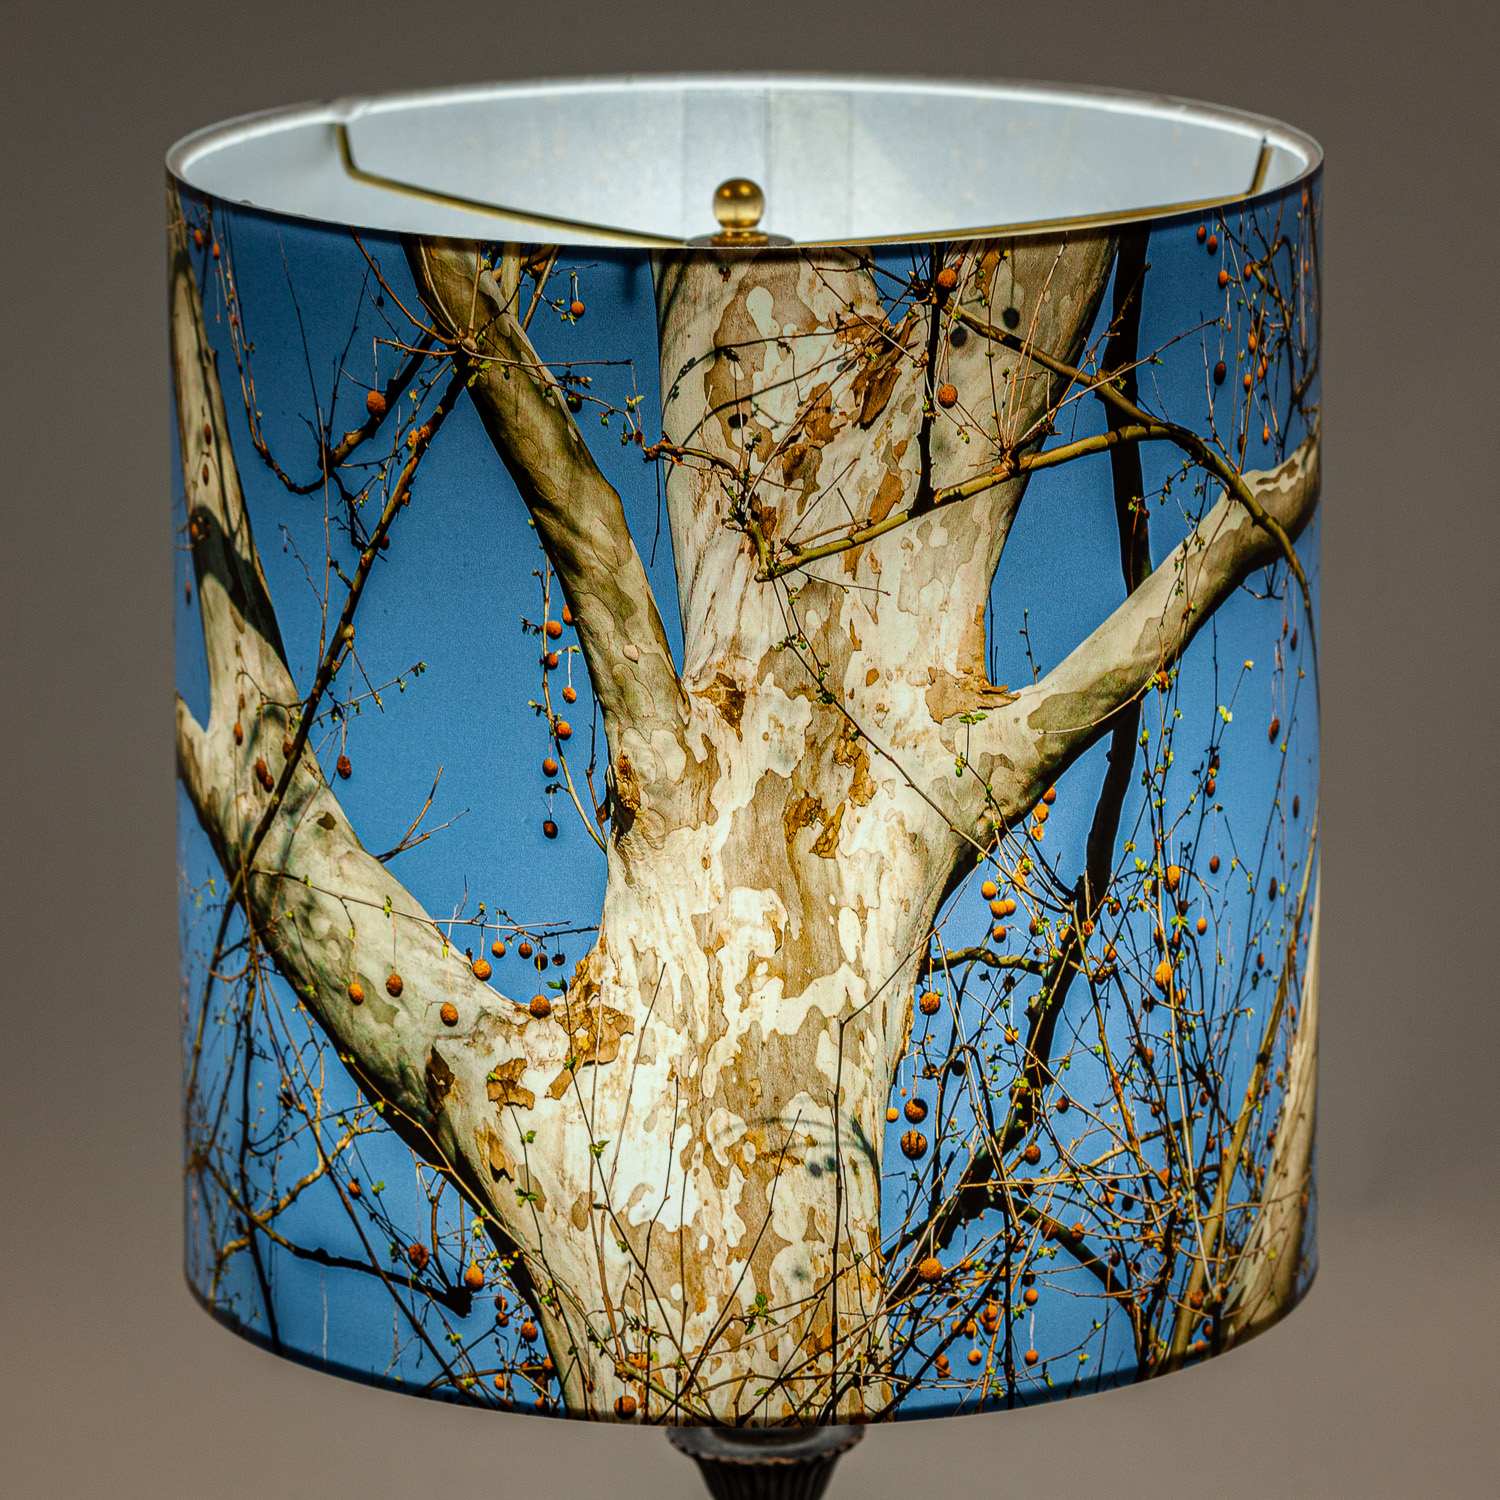 146: Sycamore tree with seedpods -- Photo on Lamp shade by David Elmore